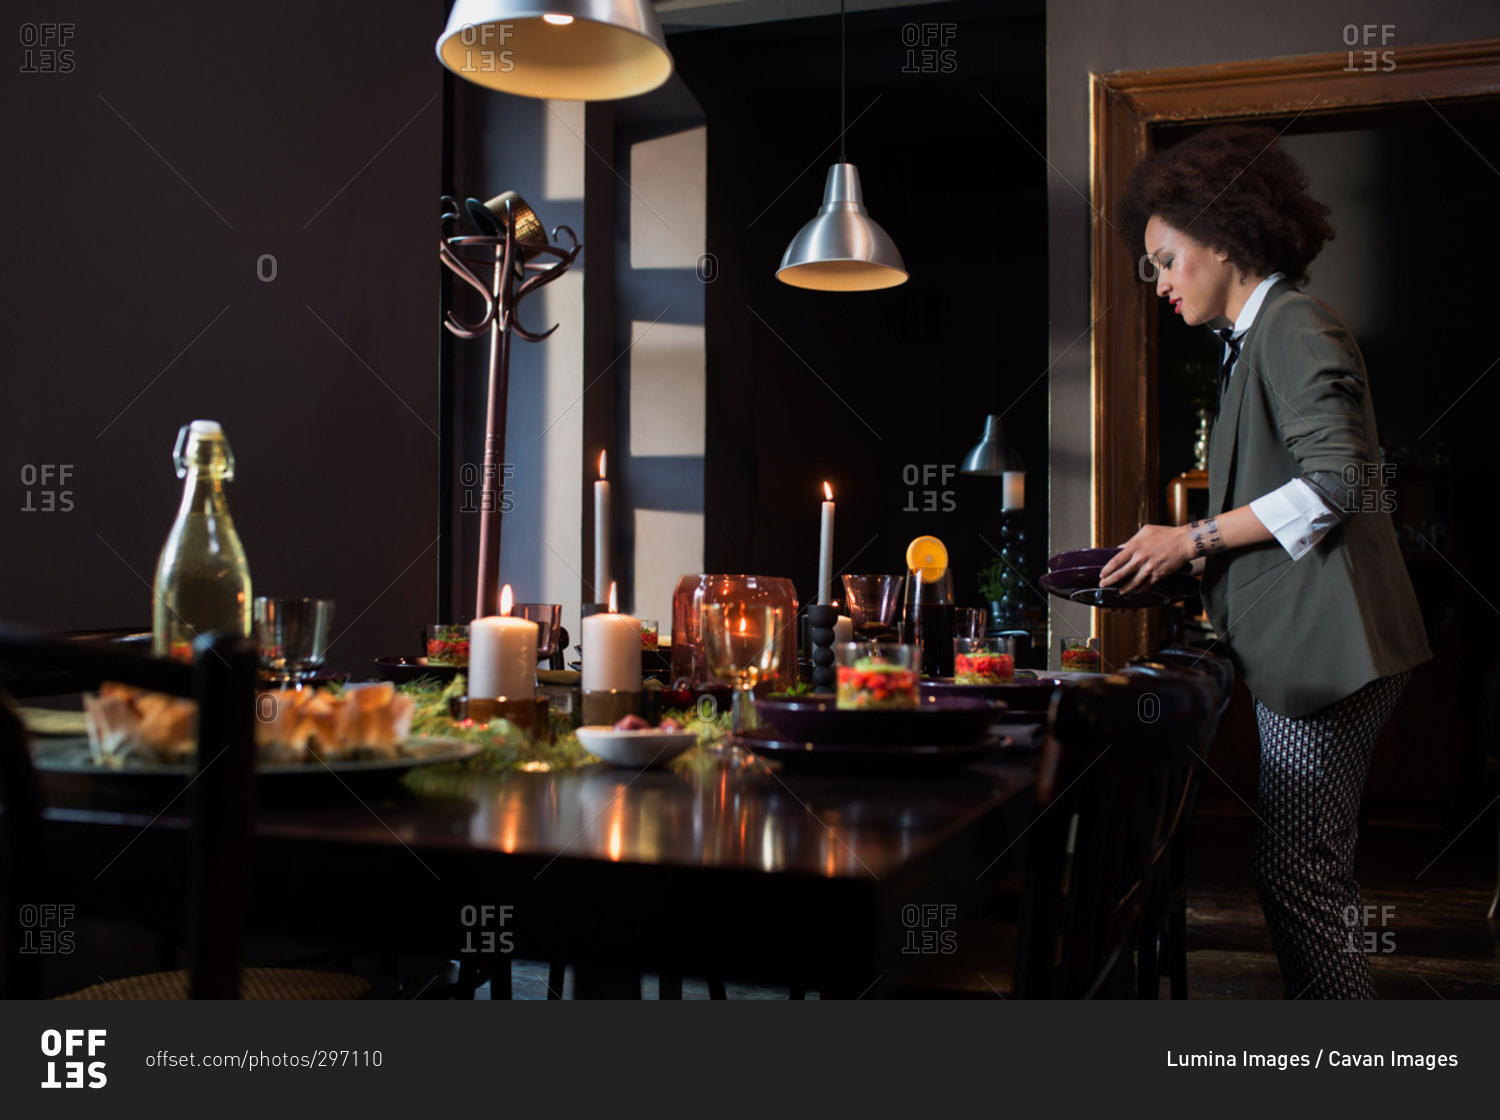 Woman setting the table for a holiday dinner party